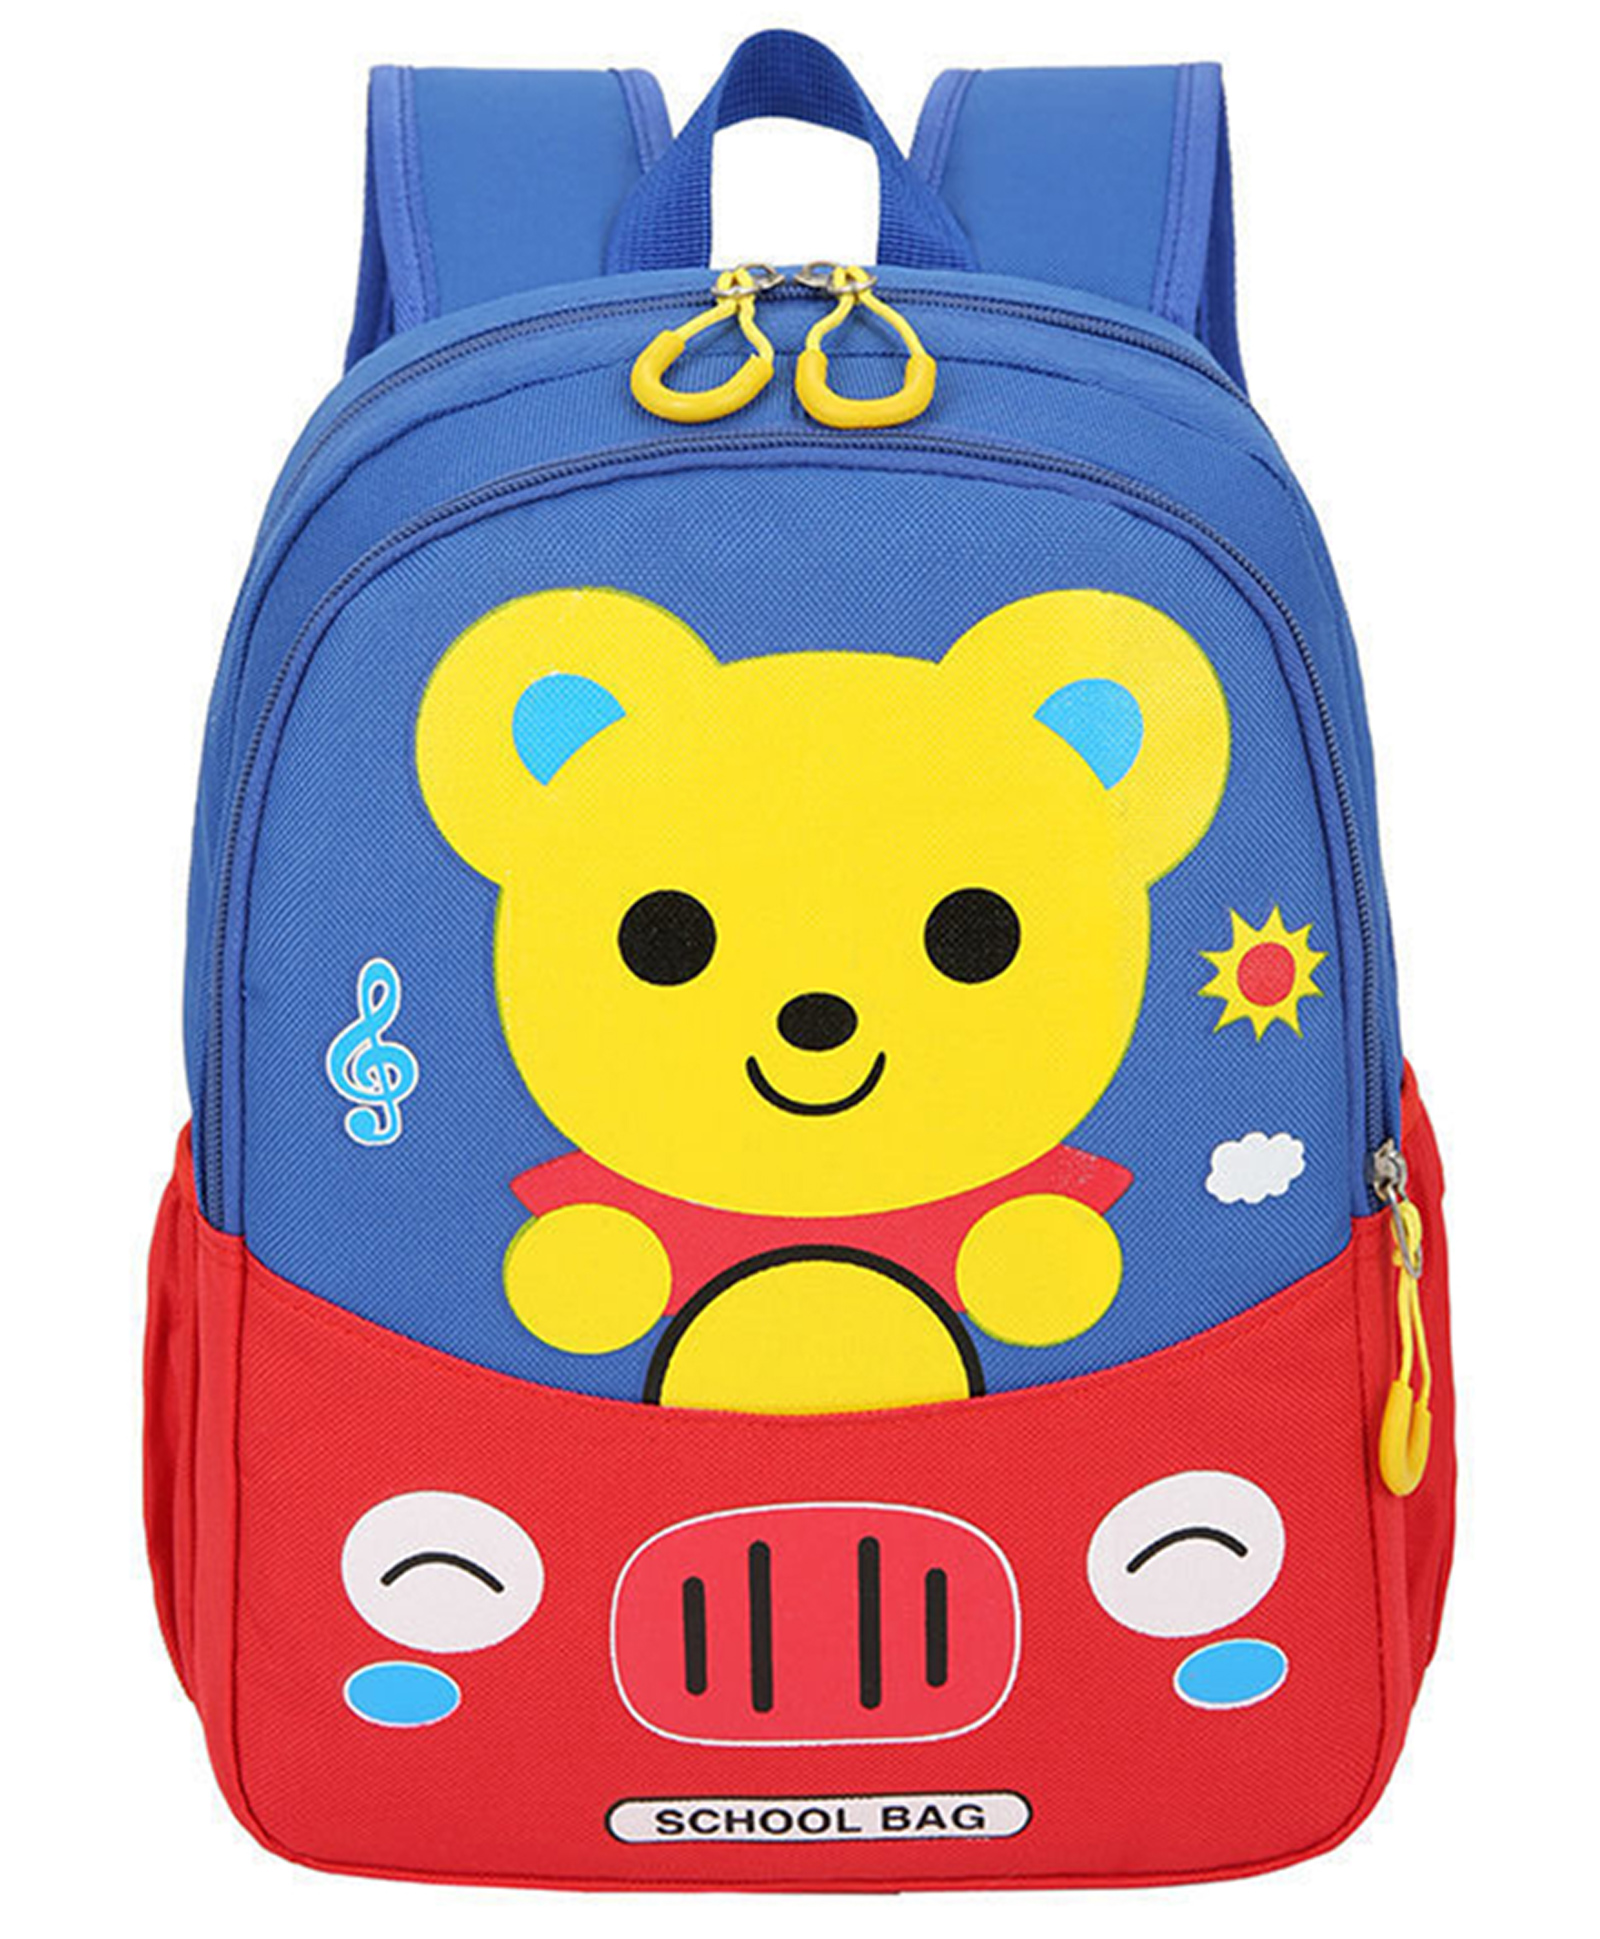 SYGA Children's School Bag Bear Cartoon Backpack Blue - 13 inches Online in  India, Buy at Best Price from  - 11794387